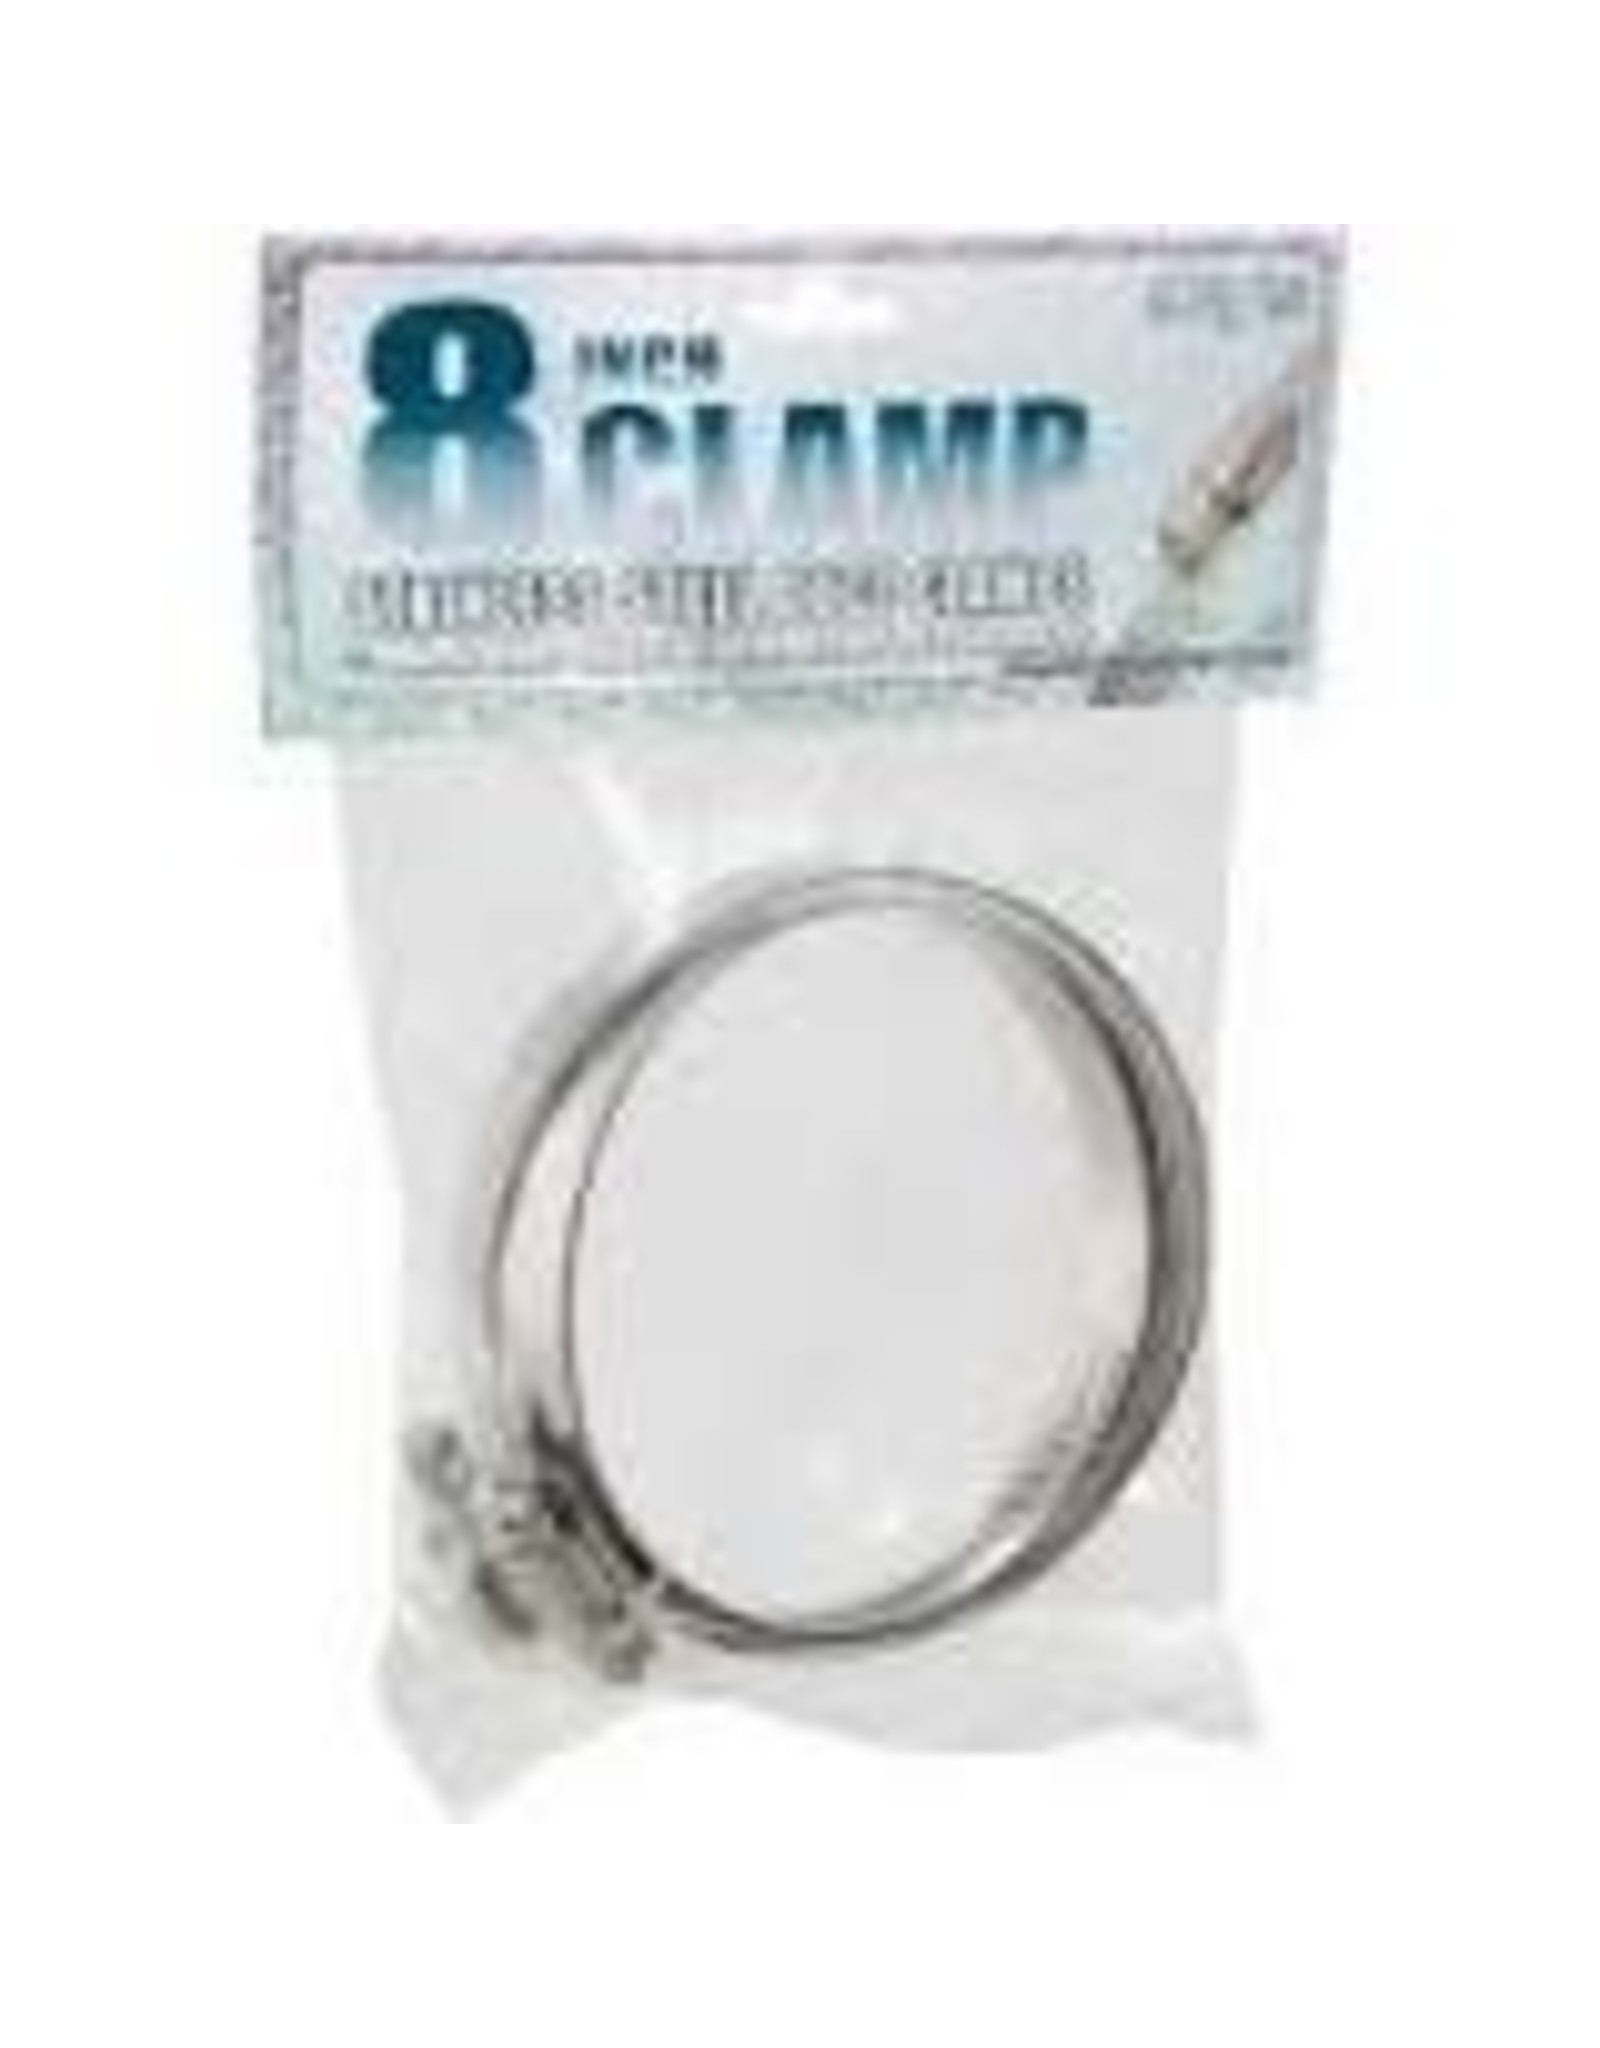 Hydrofarm Stainless Steel Duct Clamps - 8